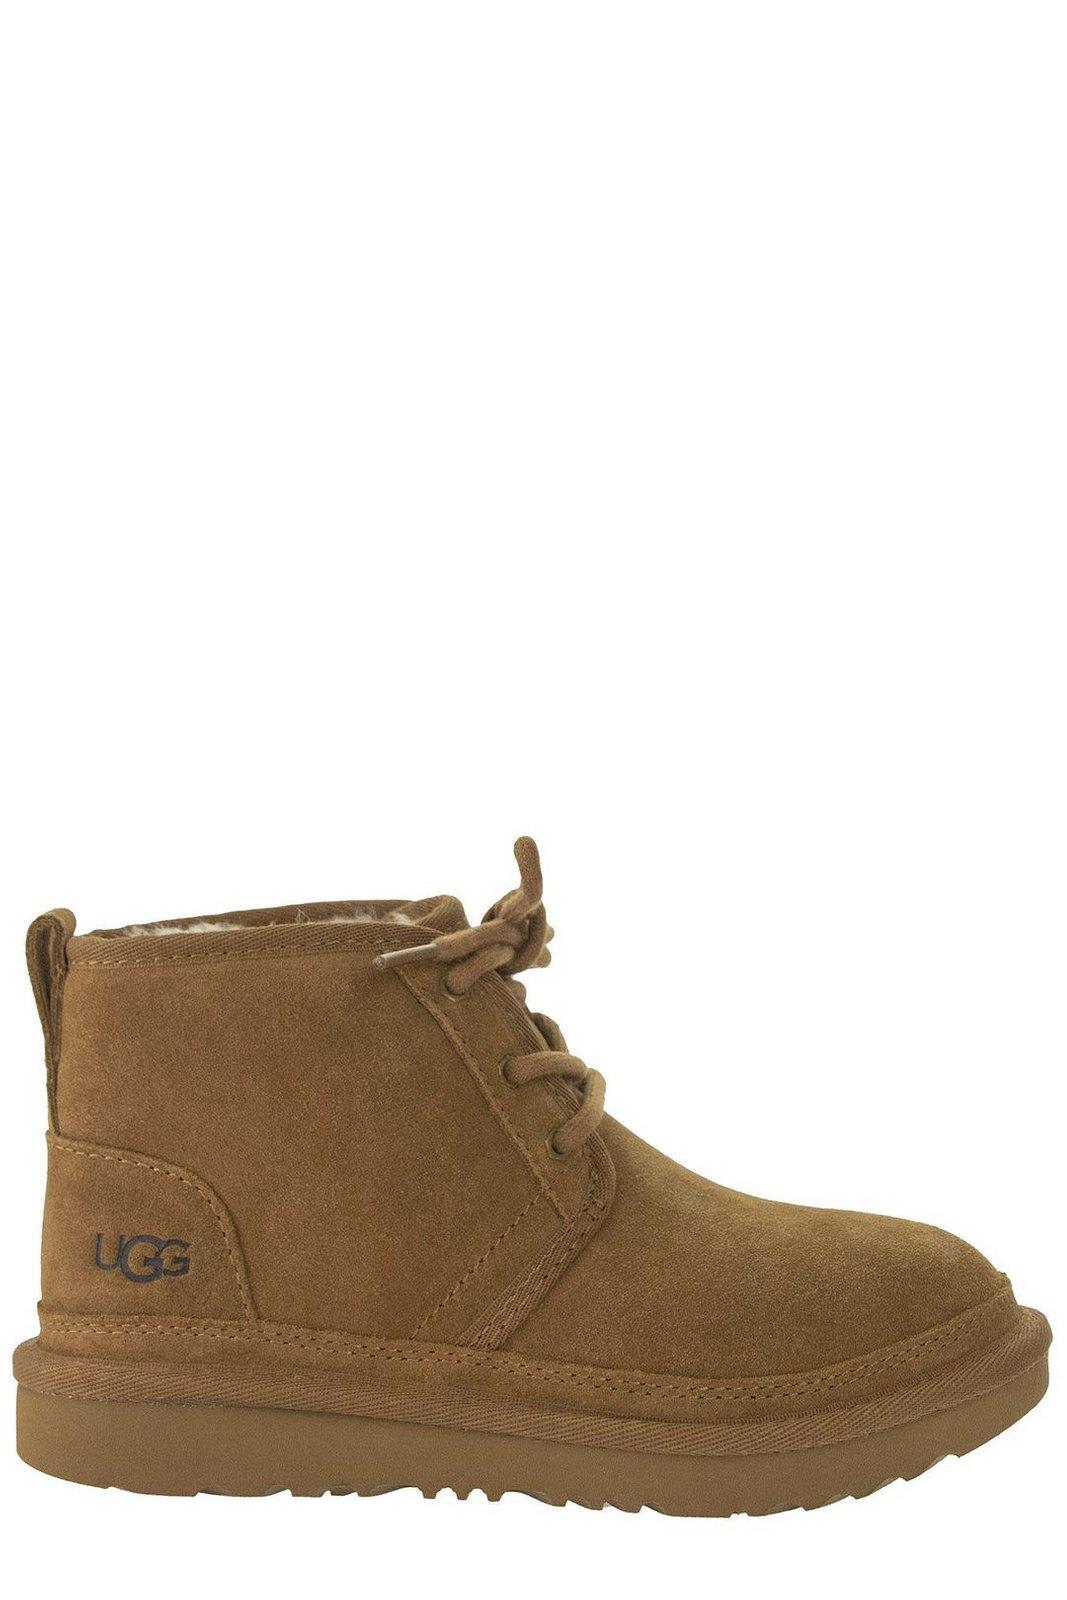 UGG Neumel Ii Lace-up Ankle Boots